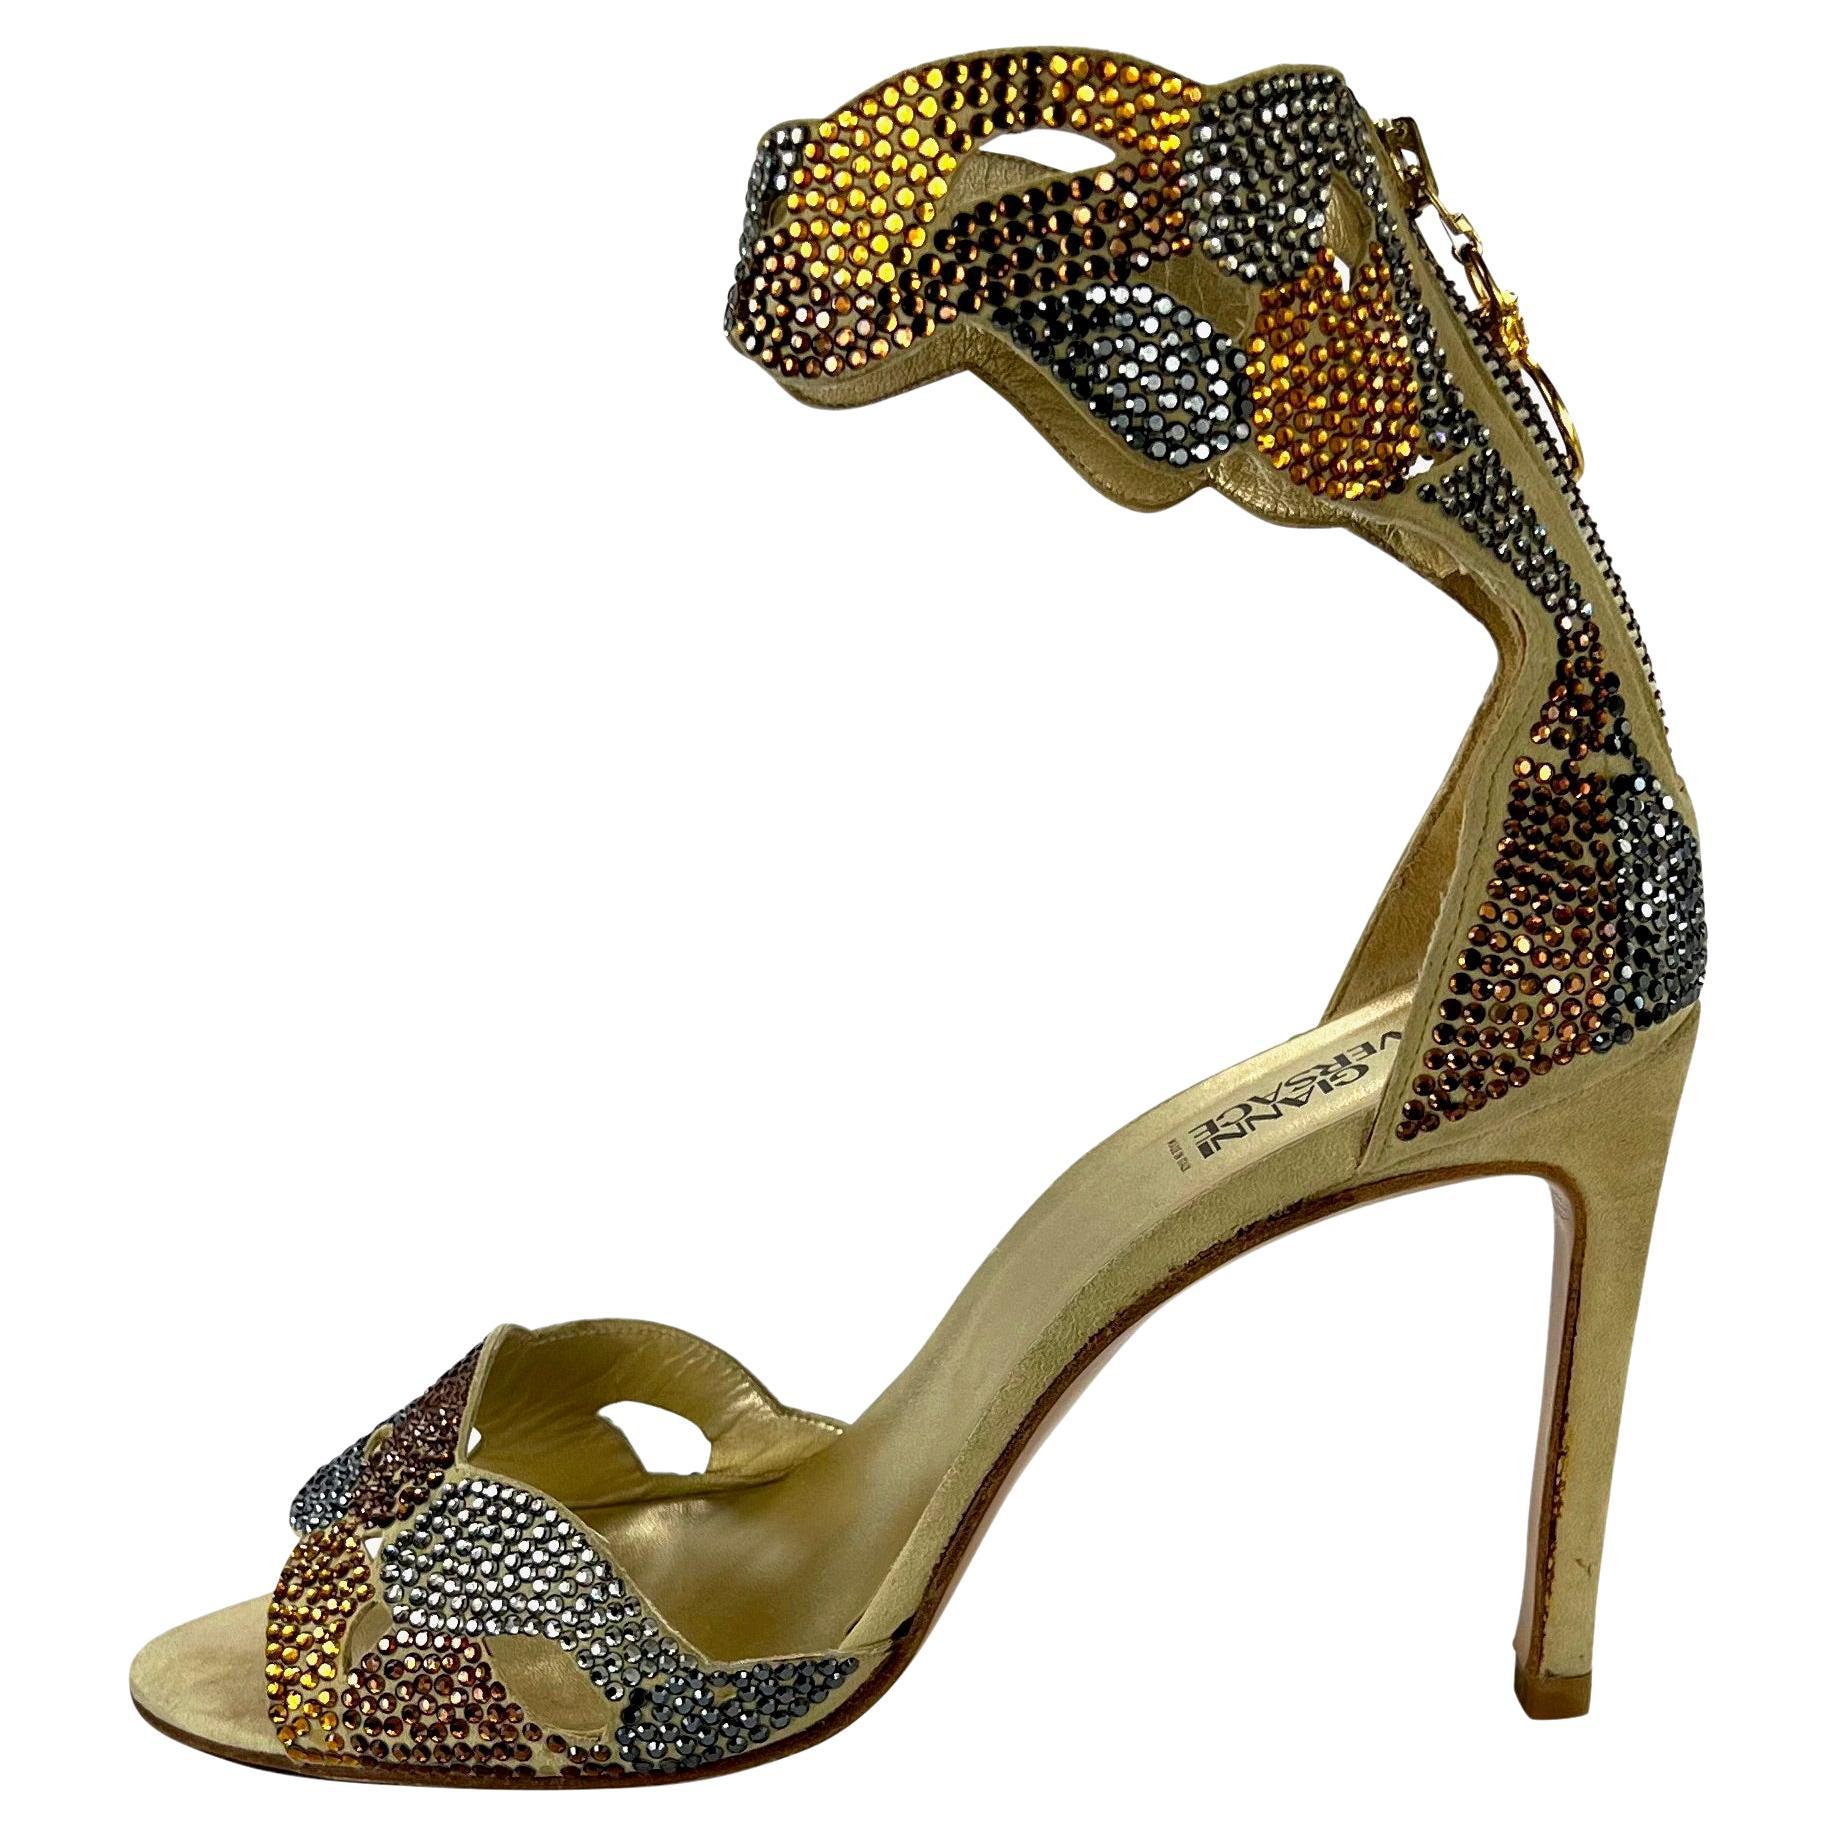 S/S 2000 Gianni Versace for Donatella Versace Crystal Pump Size 39